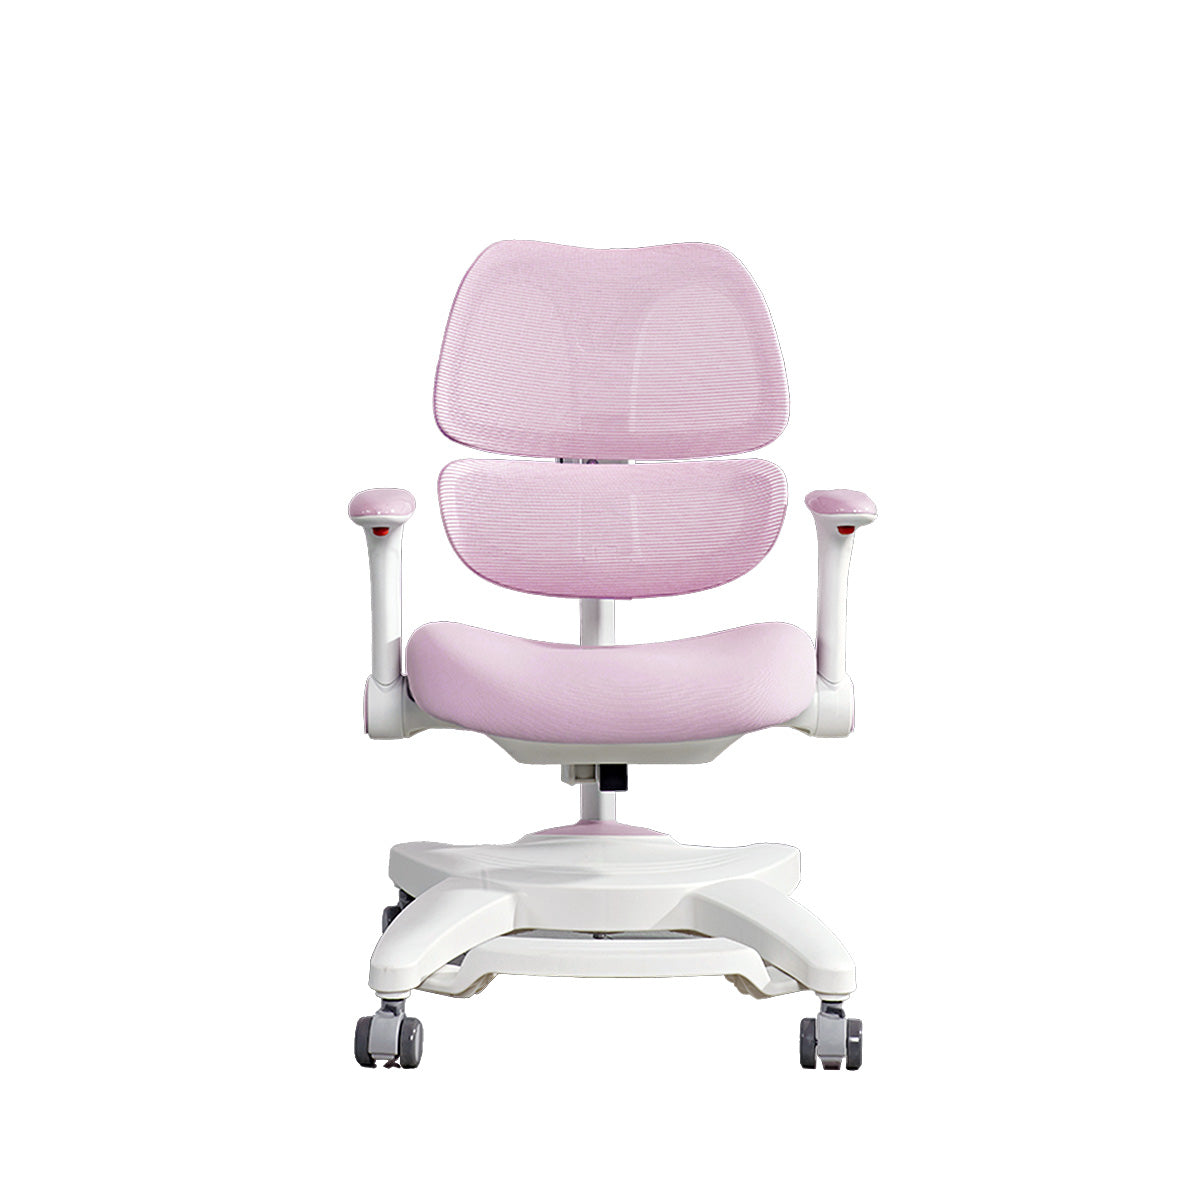 IMPACT Kids Ergonomic Chair With Arm Rest, Pink